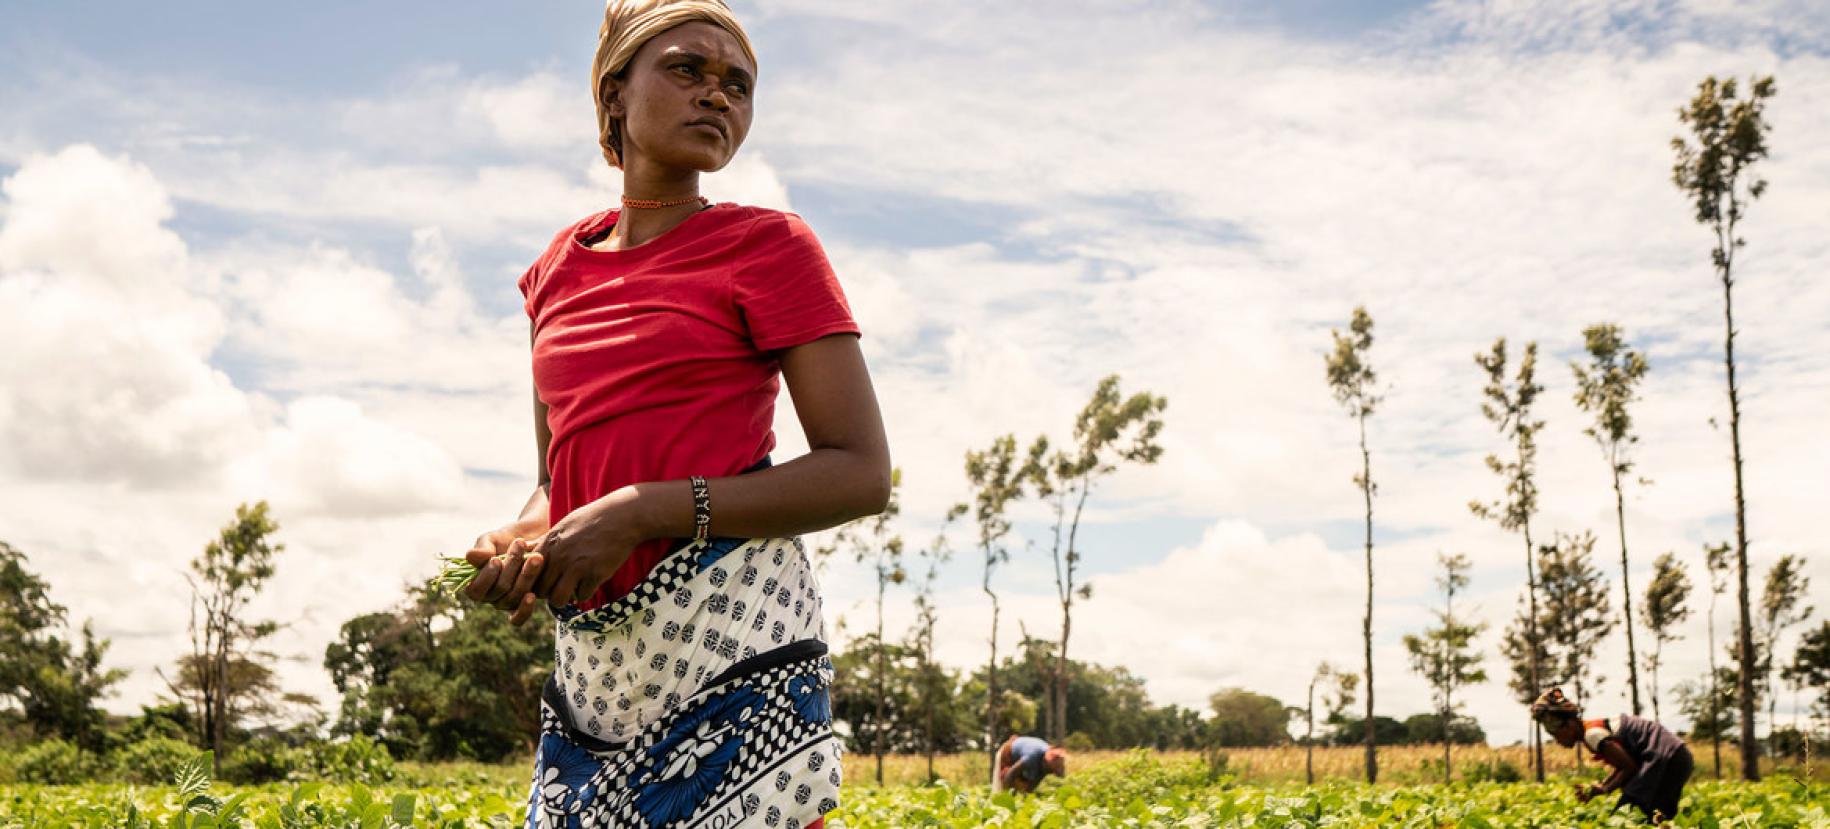 A woman harvests beans on a cooperative farm in Kenya.